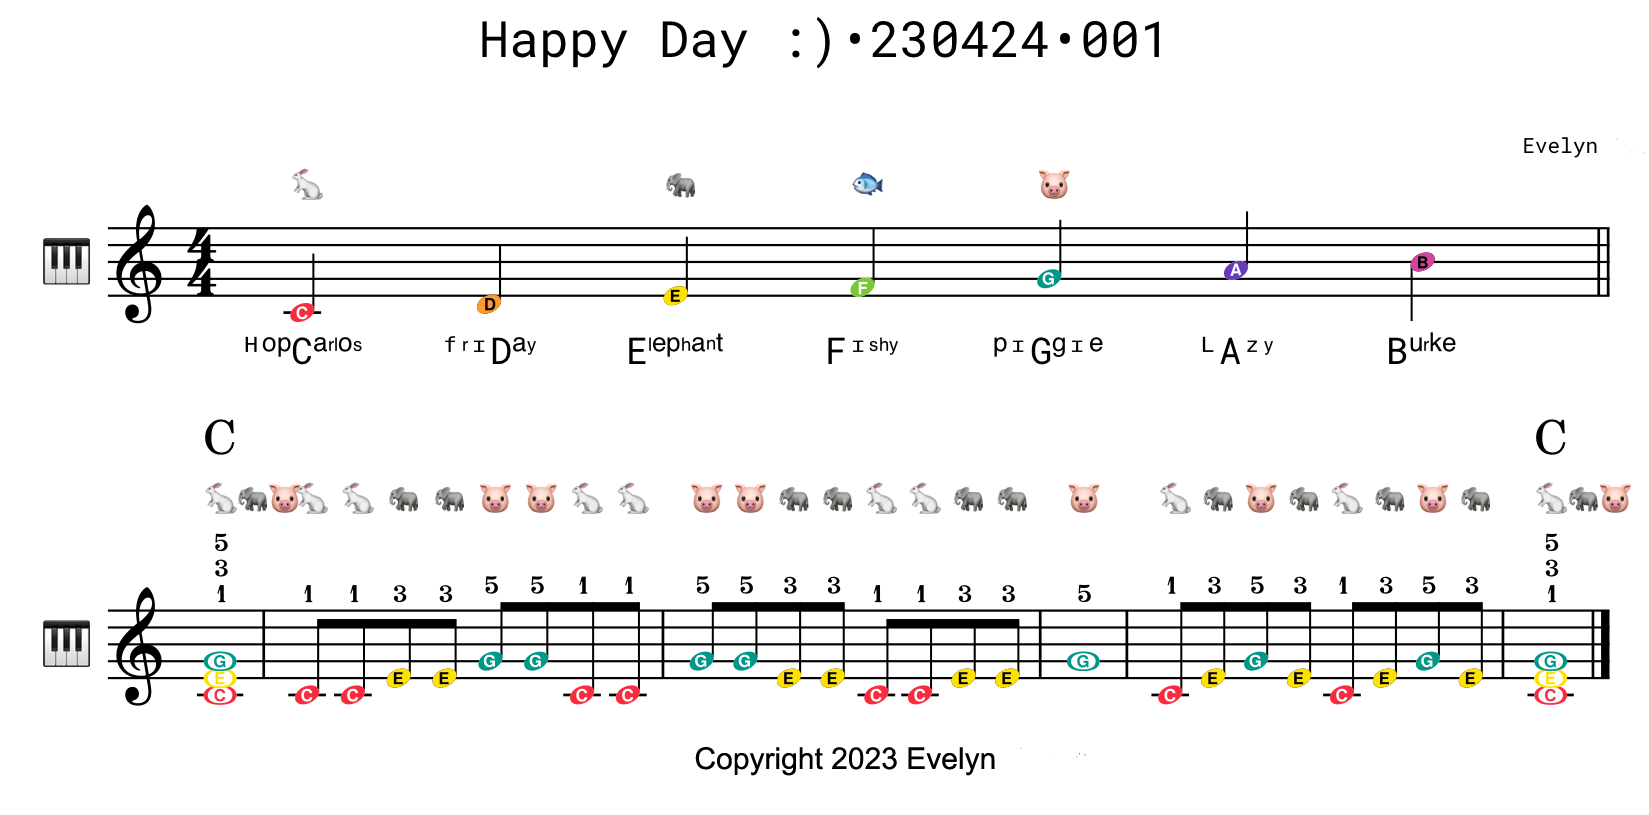 Happy Day composed by Eveyln copyright 2023